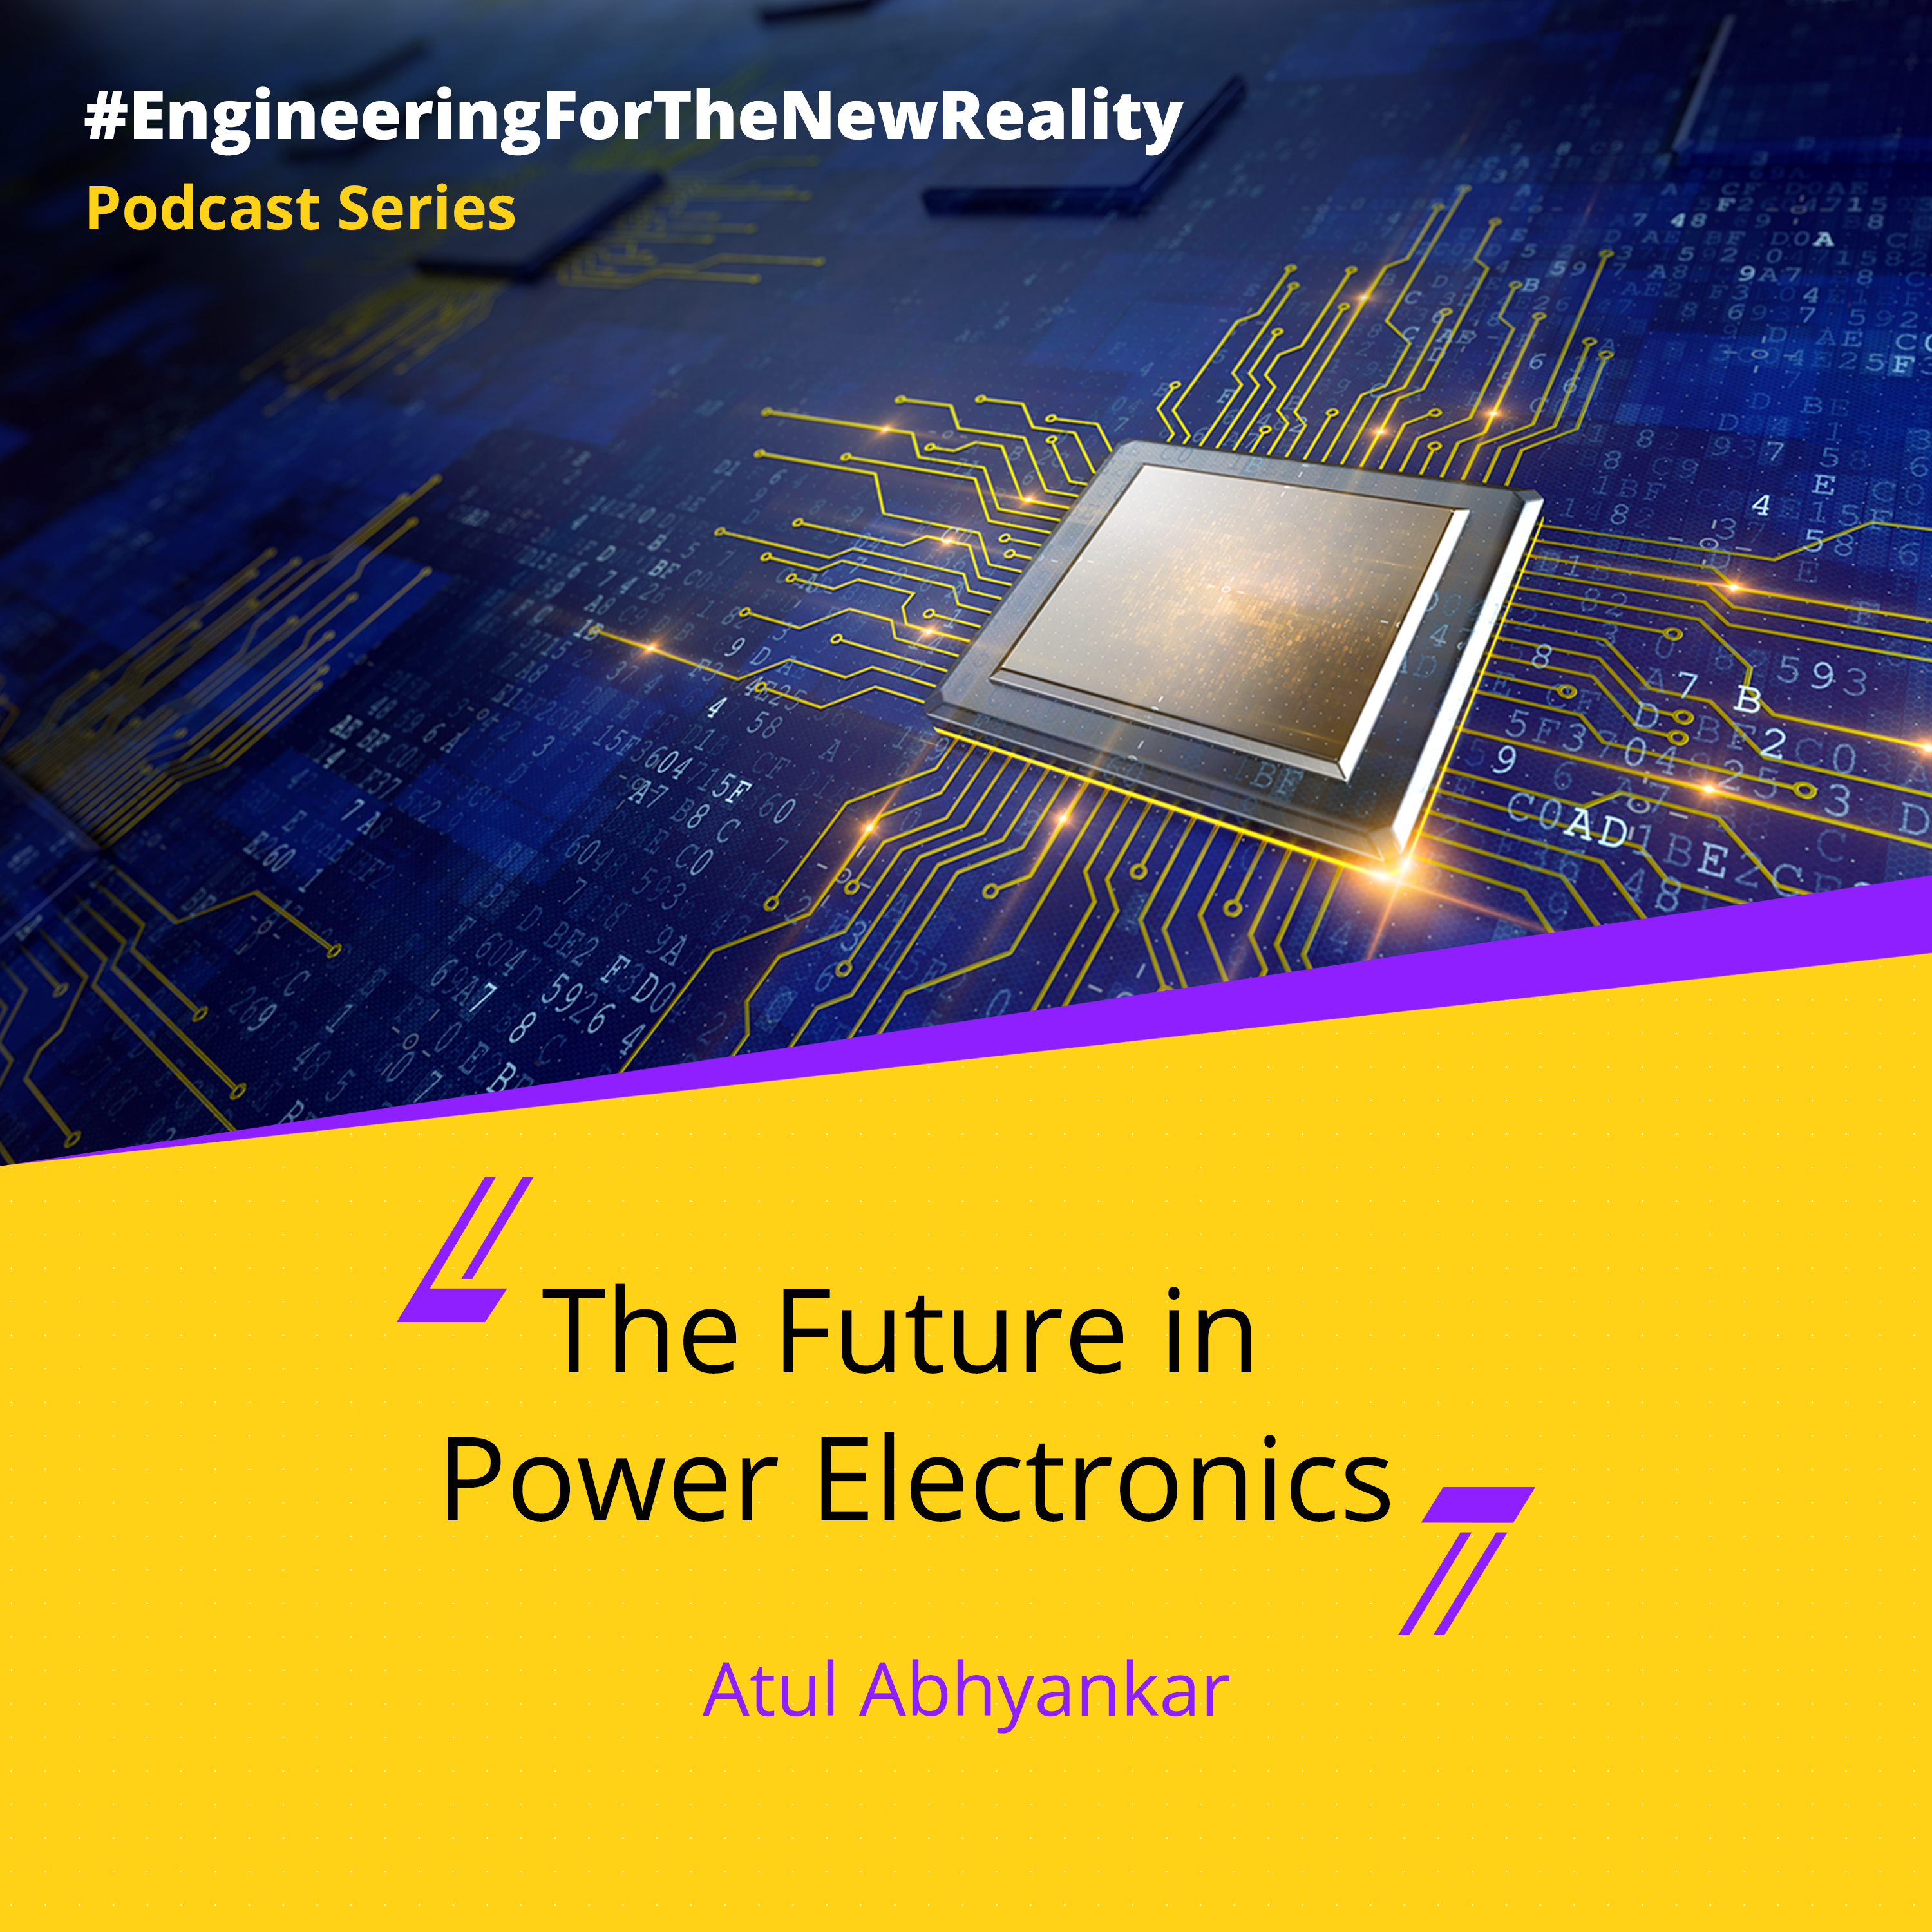 The Future in Power Electronics